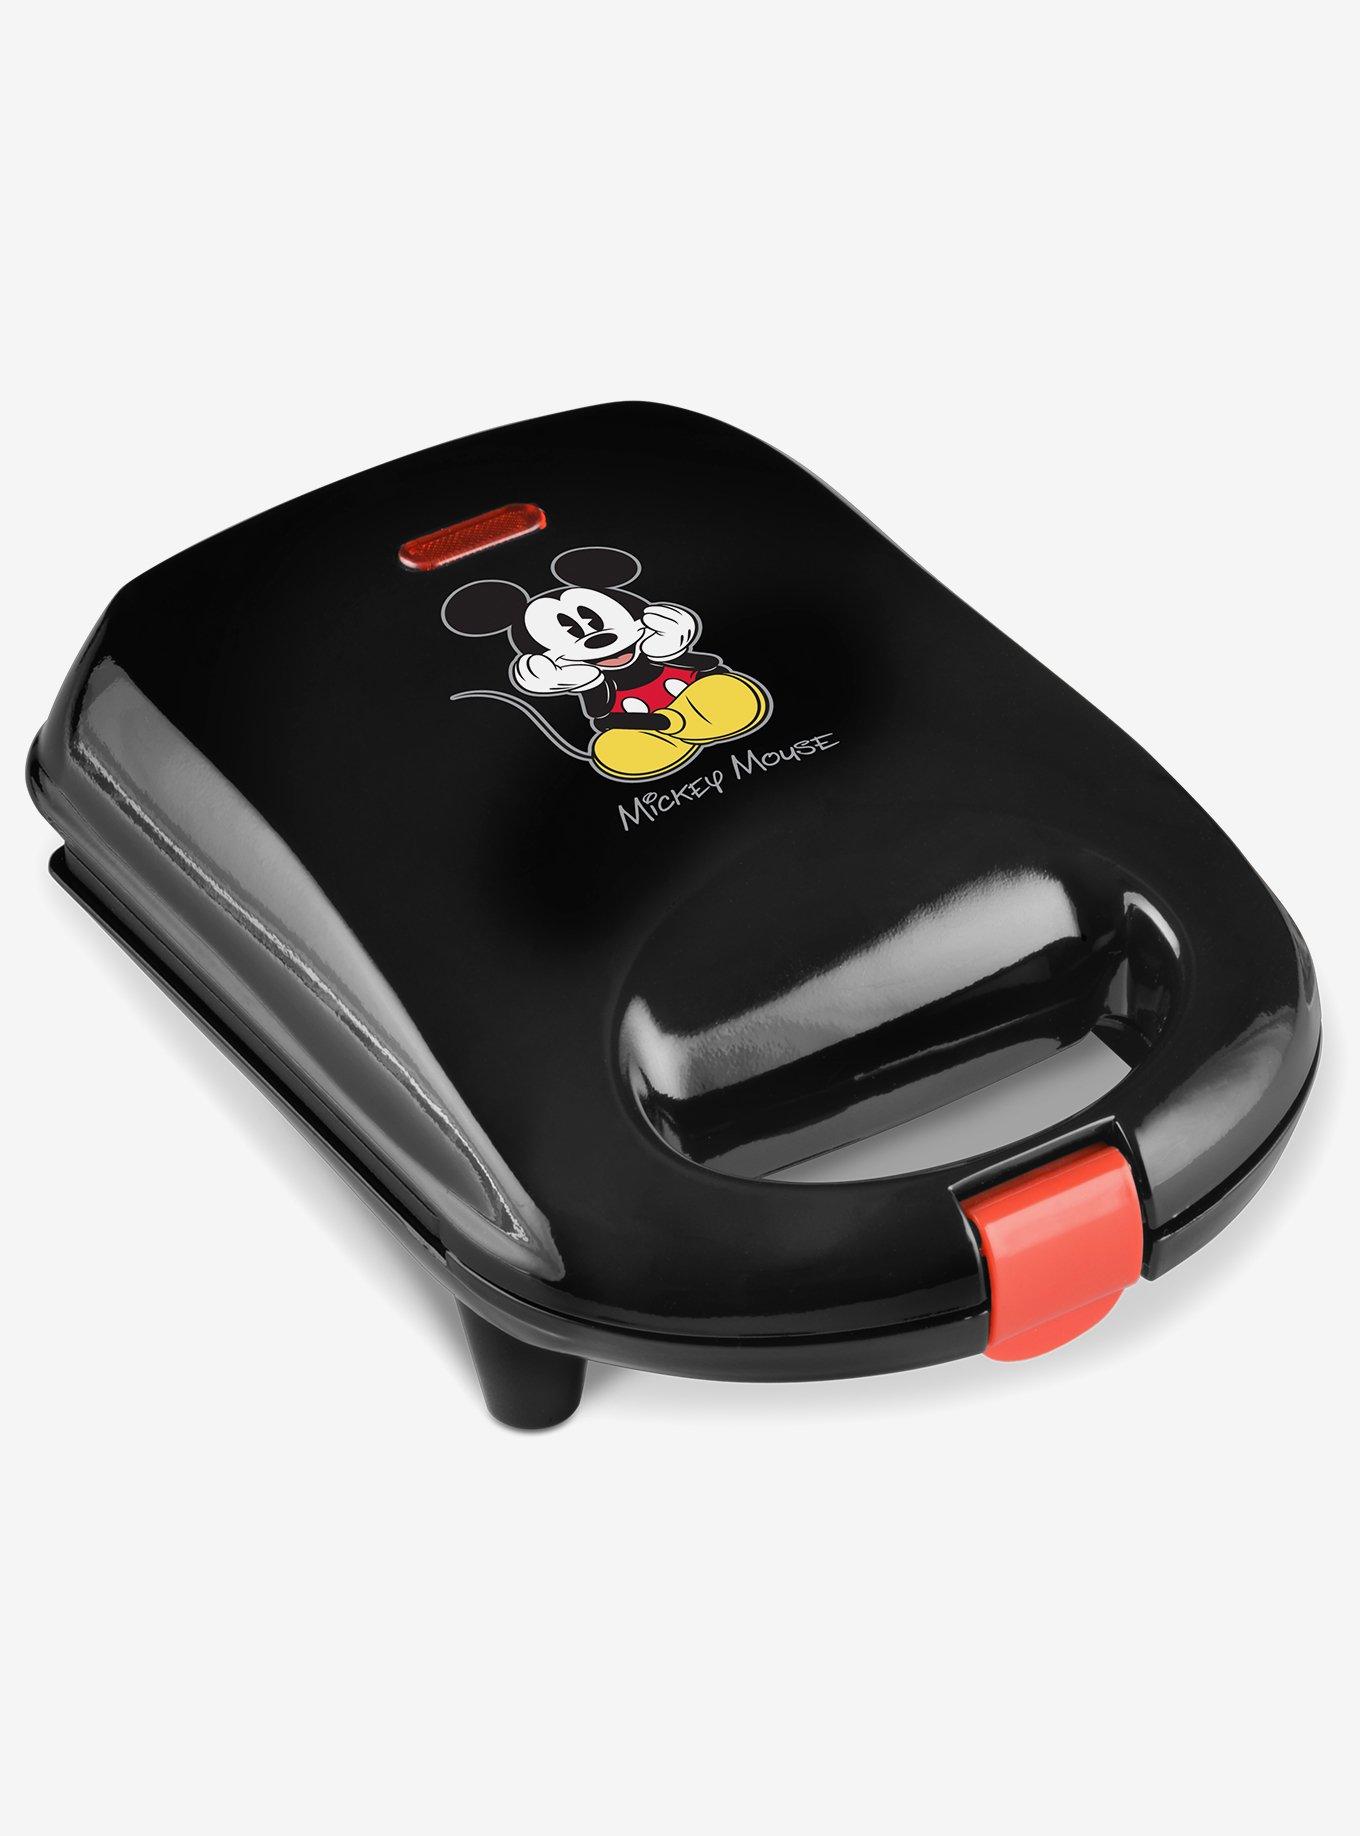 100 7 Mickey Mouse Nonstick Electric Waffle Maker